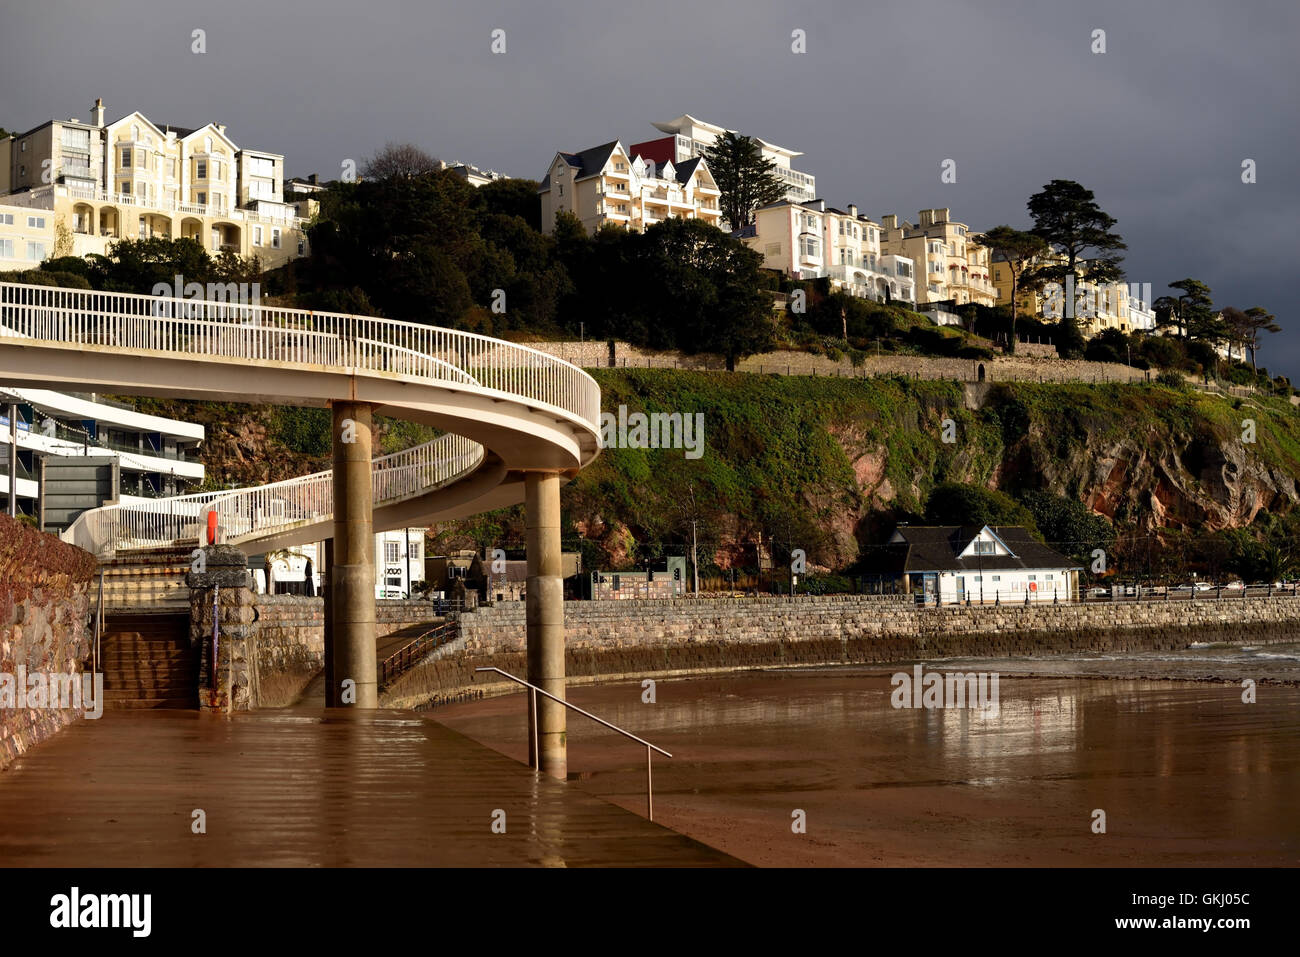 Stormy sky over Torquay seafront. Stock Photo